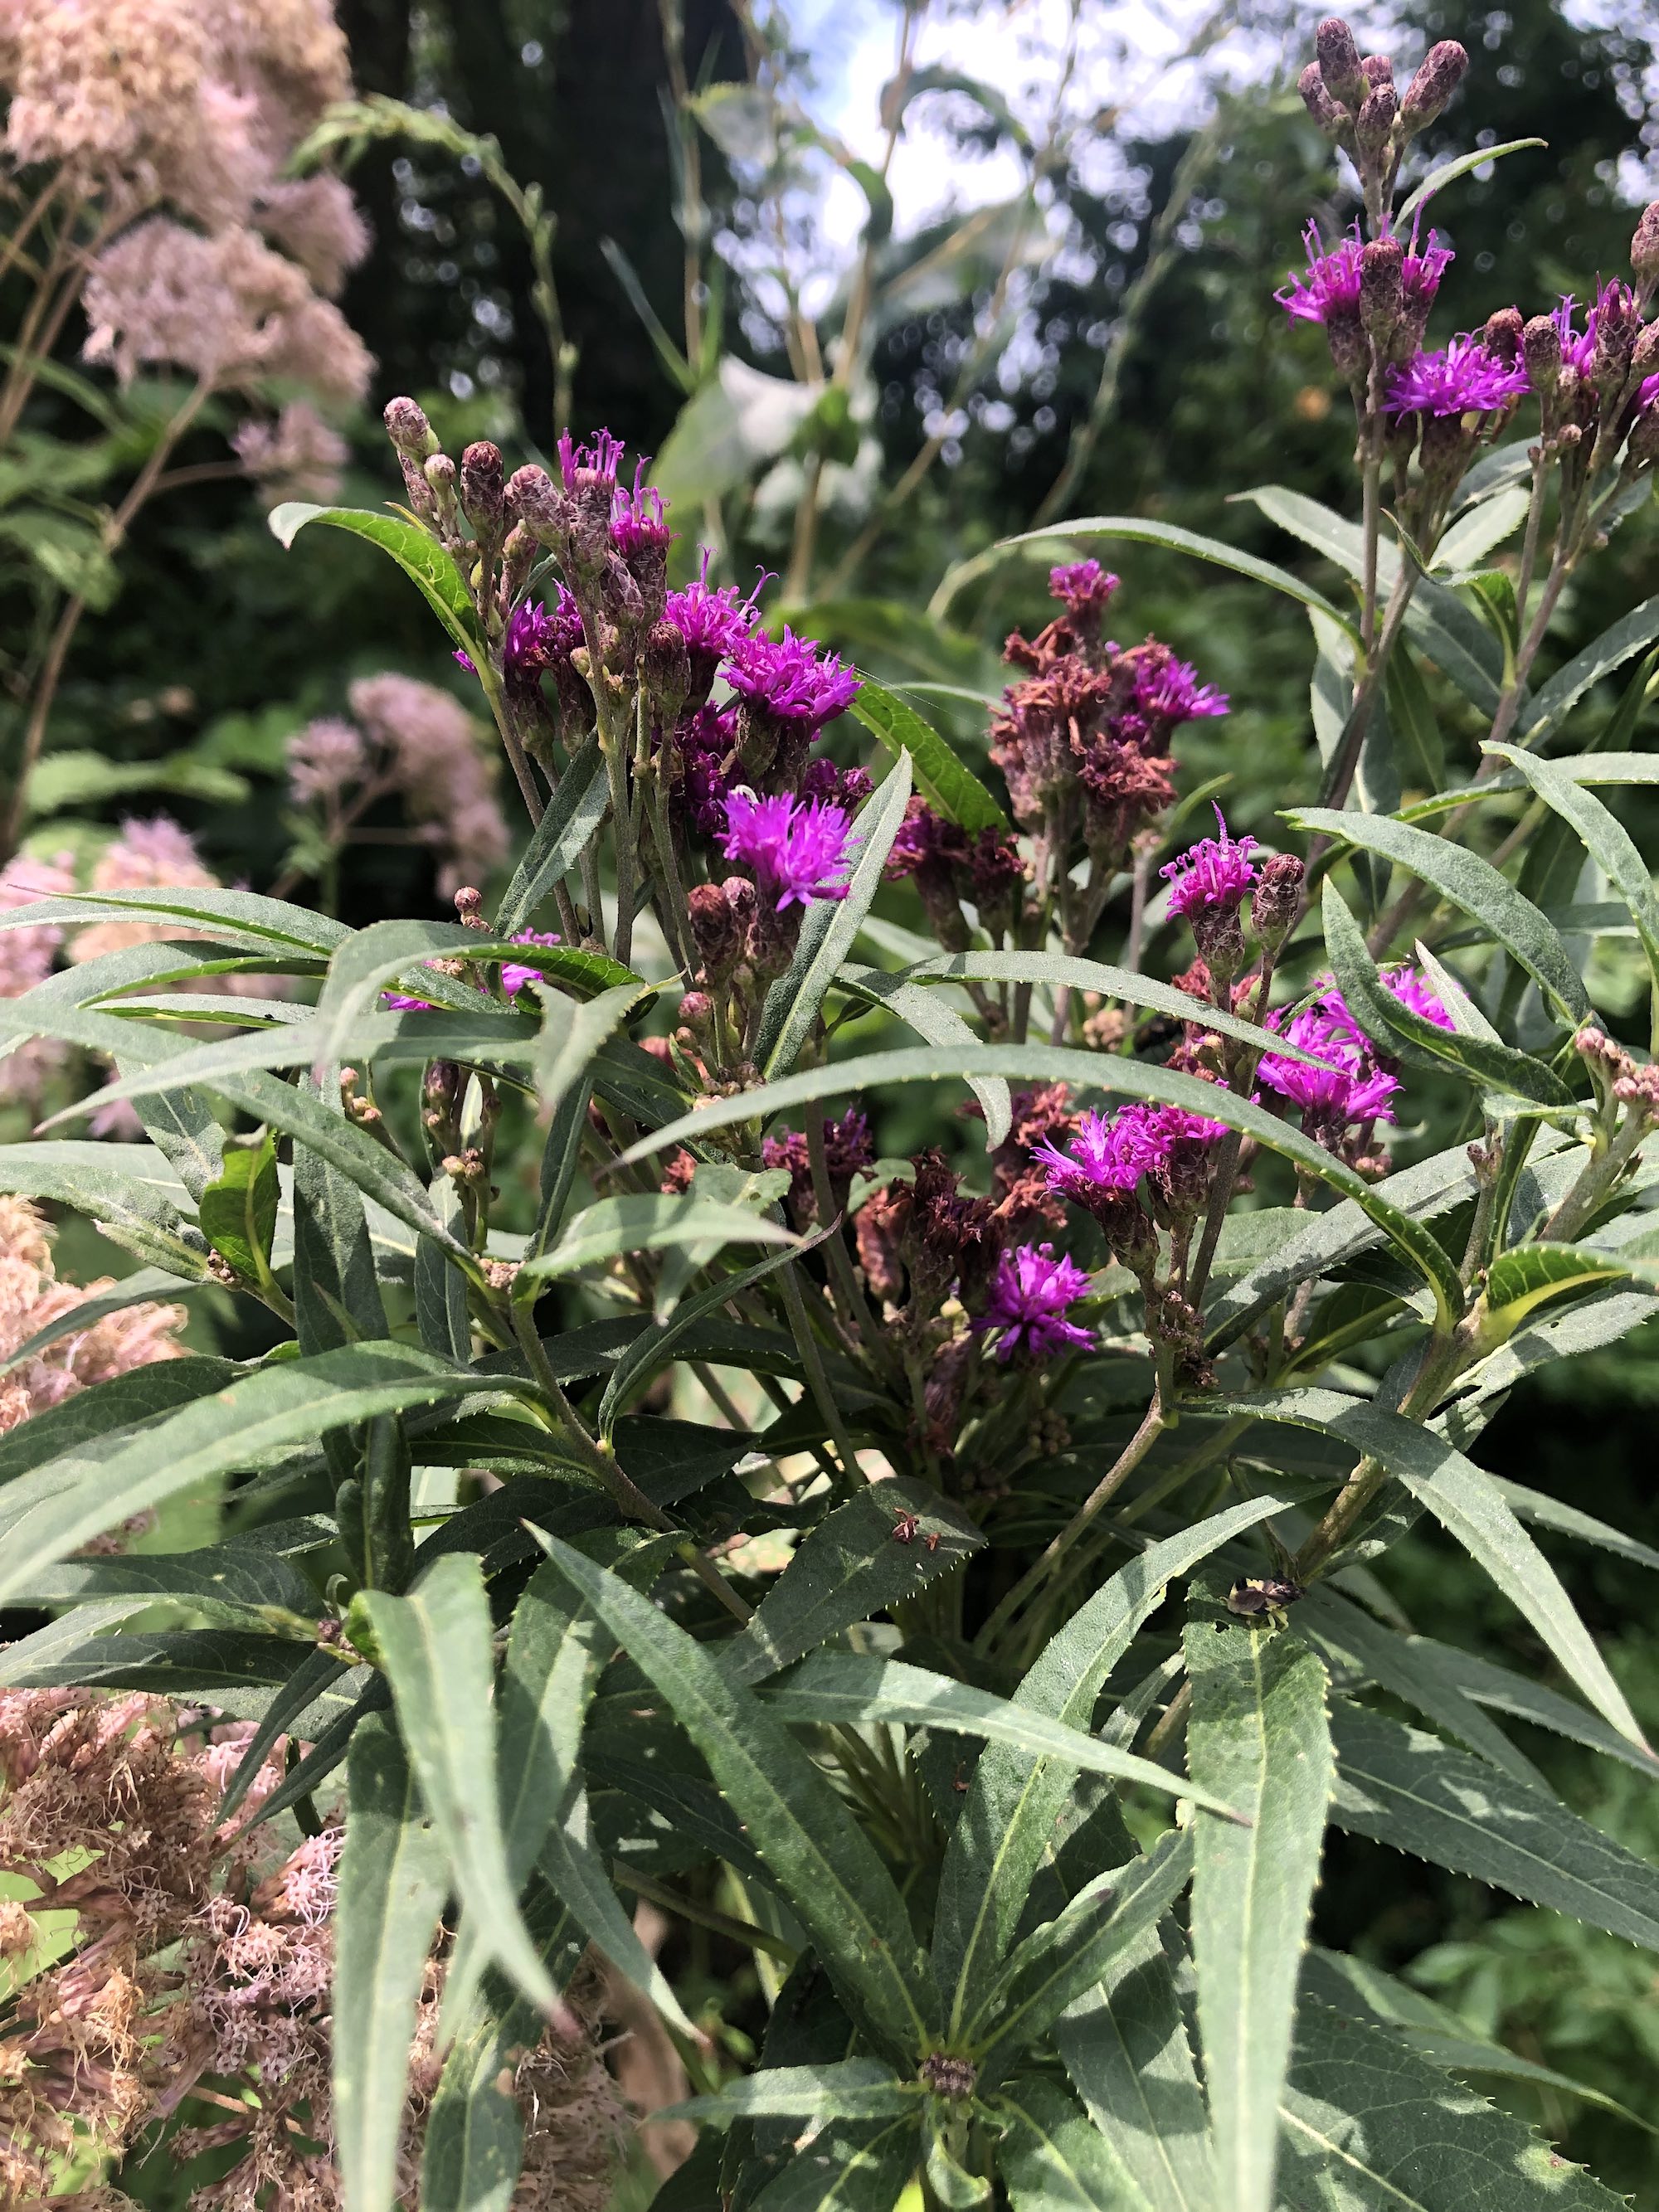 Tall Ironweed along bikepath behind Gregory Street in Madison, Wisconsin on July 31, 2021.